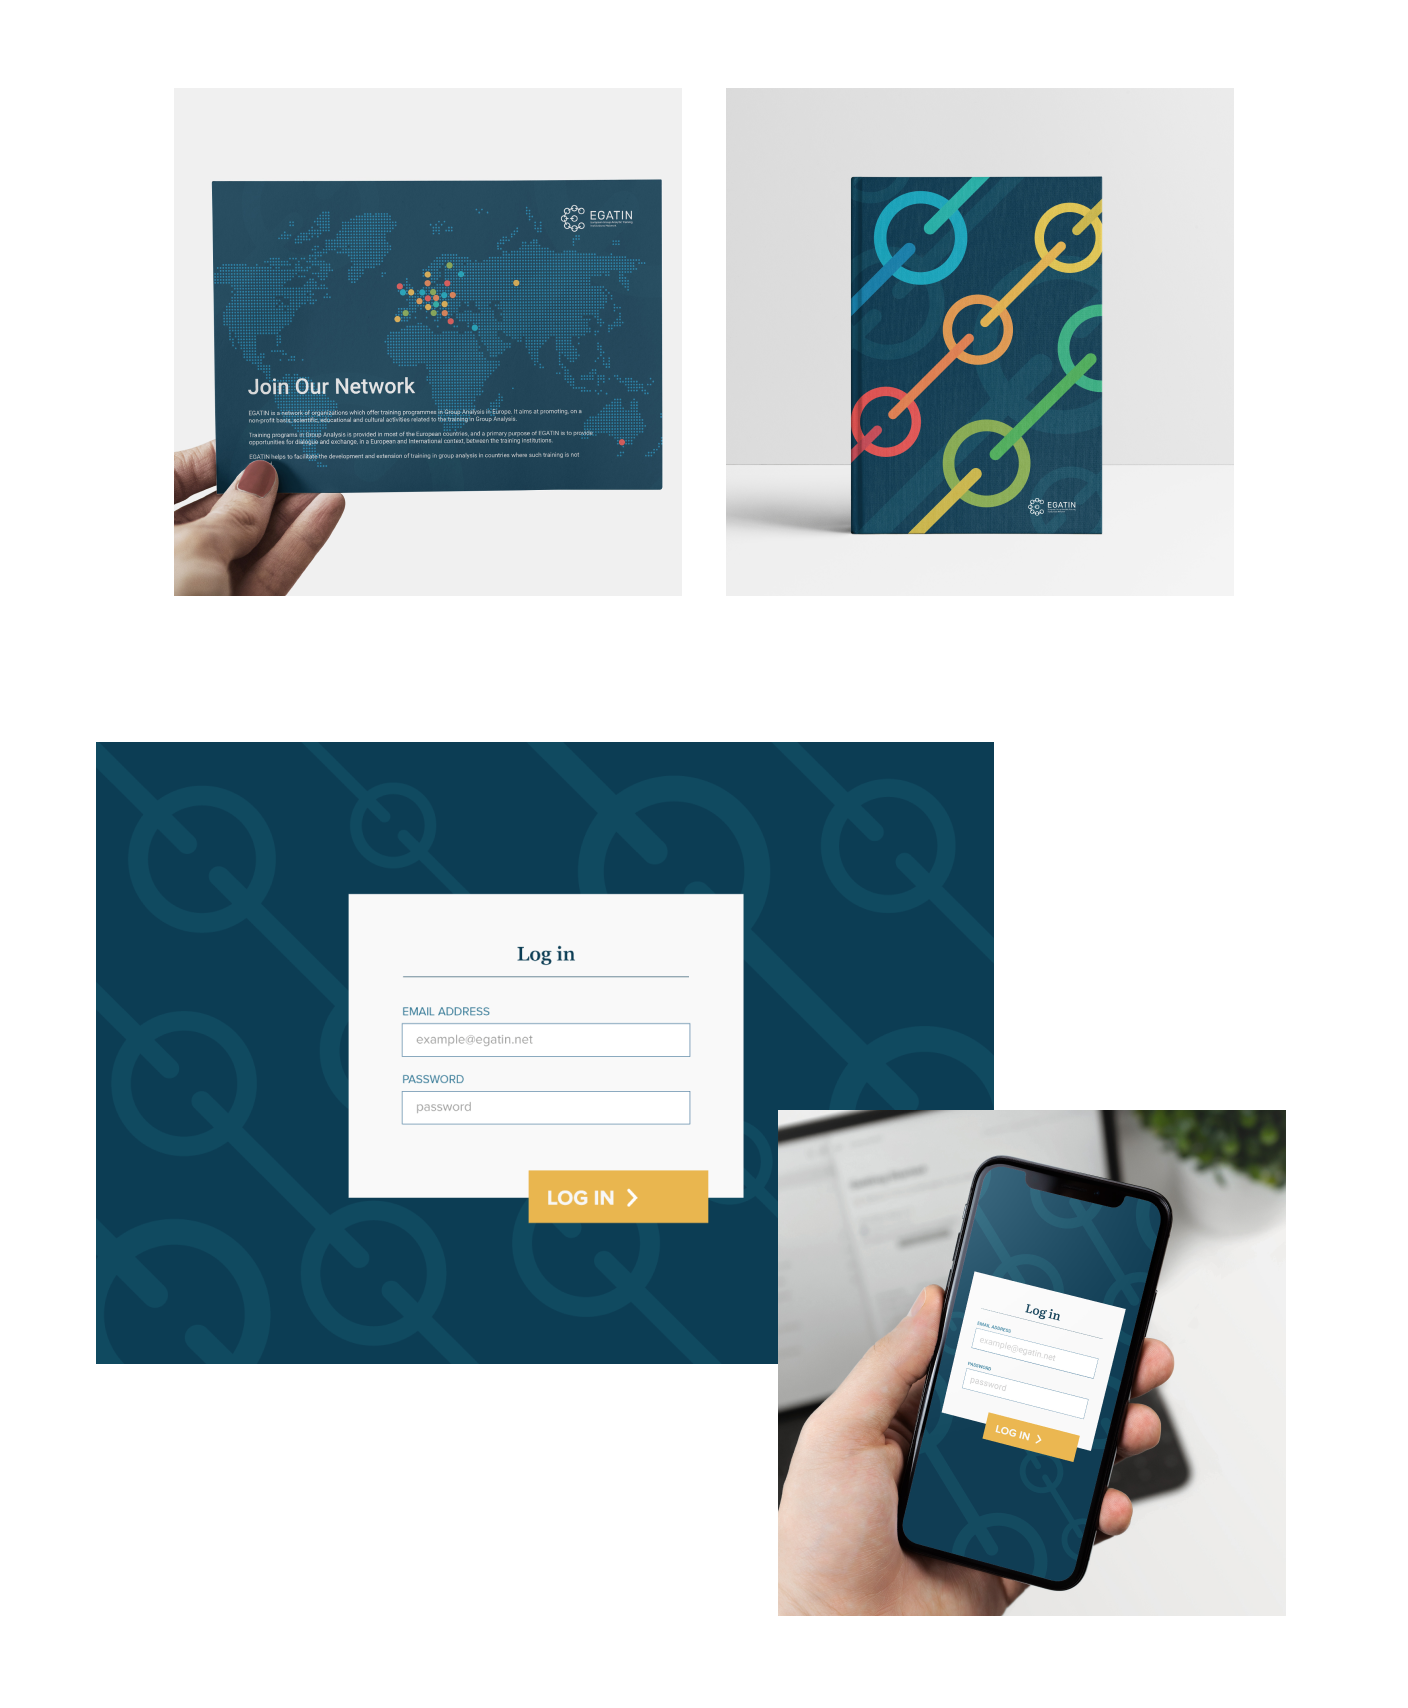 egatin visual identity - various implementation of design elements: flyer design, book cover and log in modal